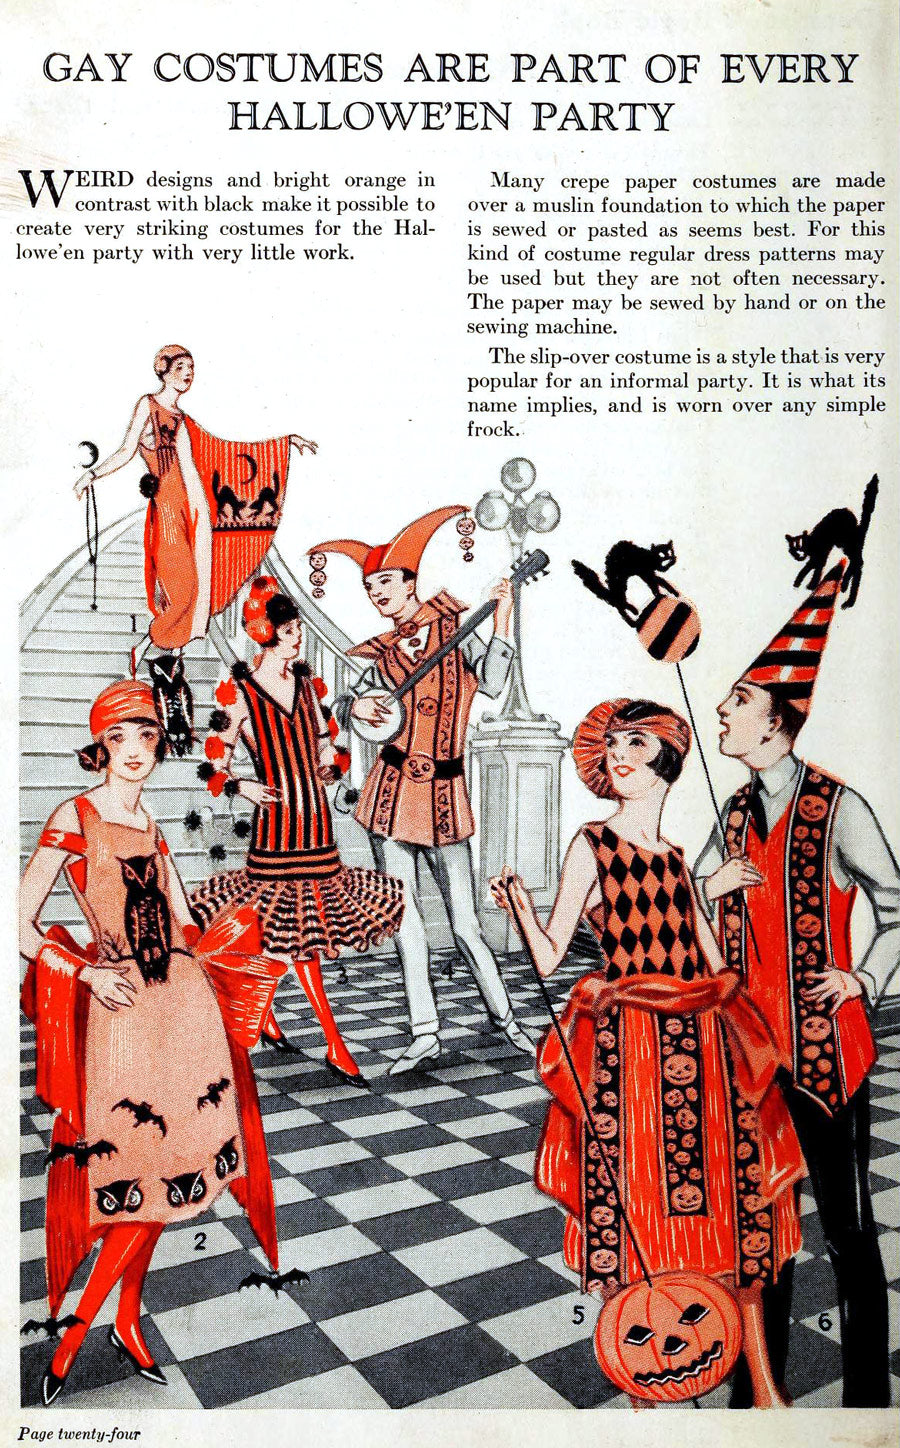 An illustration from "Dennison's Bogie Book" (1920) shows an array of "weird" black and orange Halloween costumes for adults with the headline "Gay Costumes Are Part of Every Hallowe'en Party."